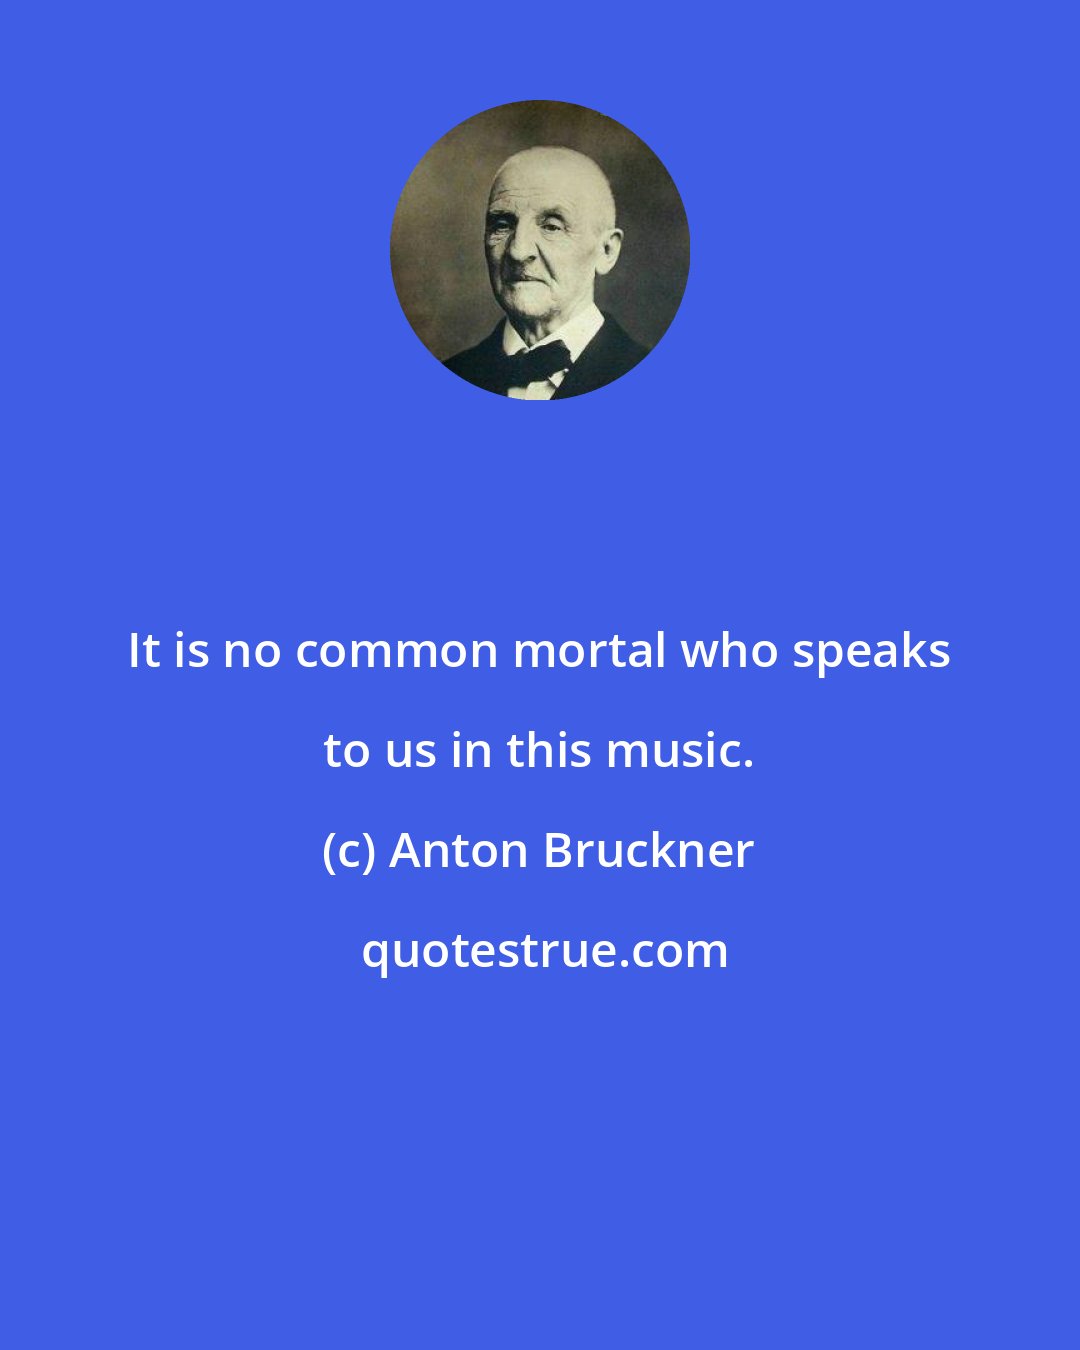 Anton Bruckner: It is no common mortal who speaks to us in this music.